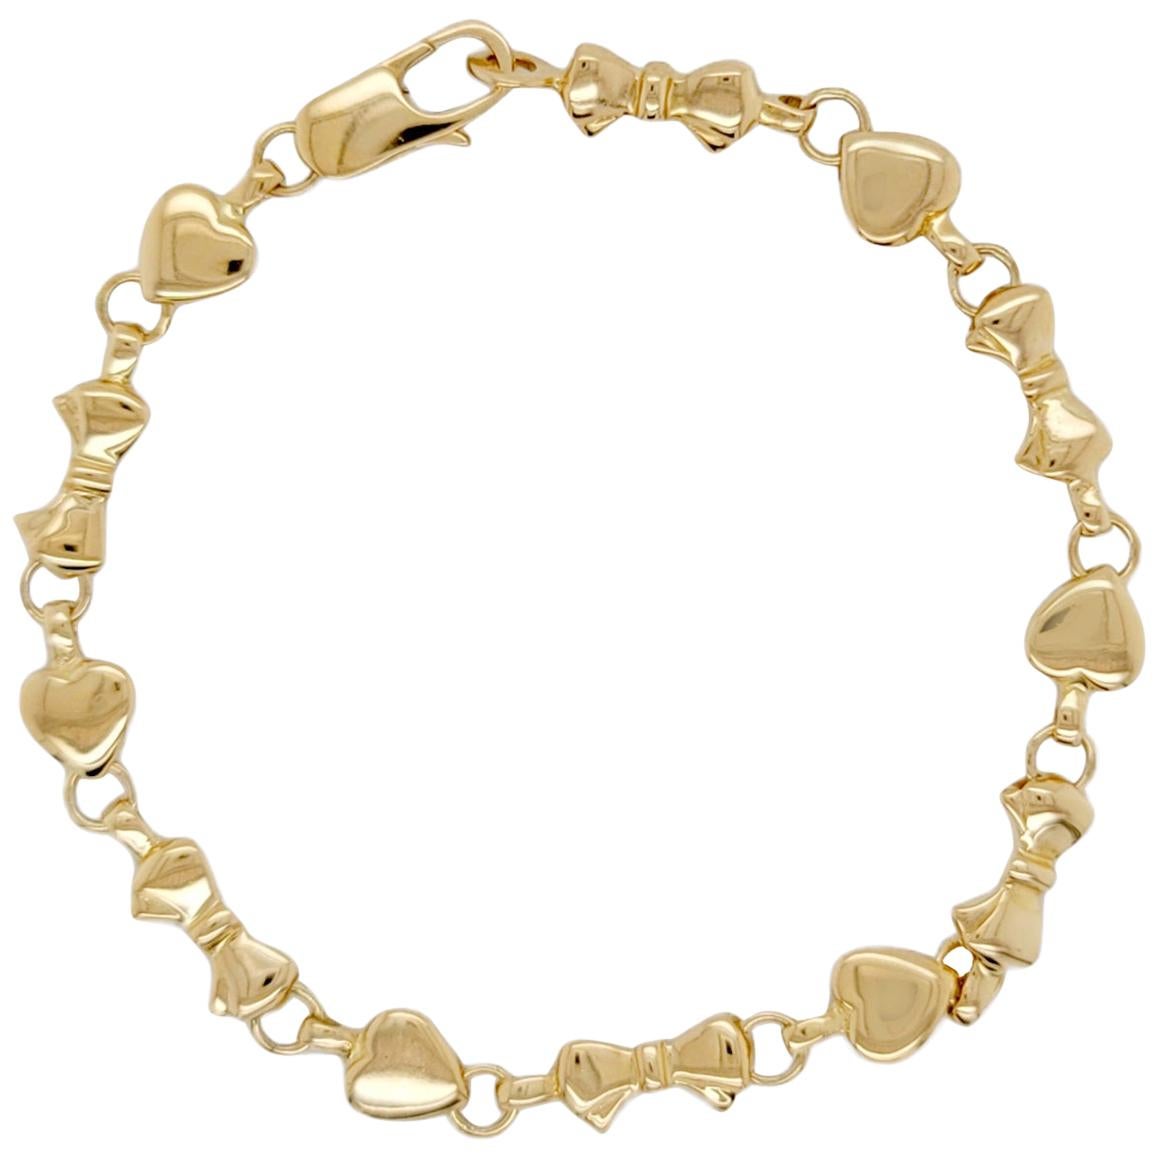 Auth Tiffany & Co. 18K Yellow Gold Heart and Bow Tie Bracelet